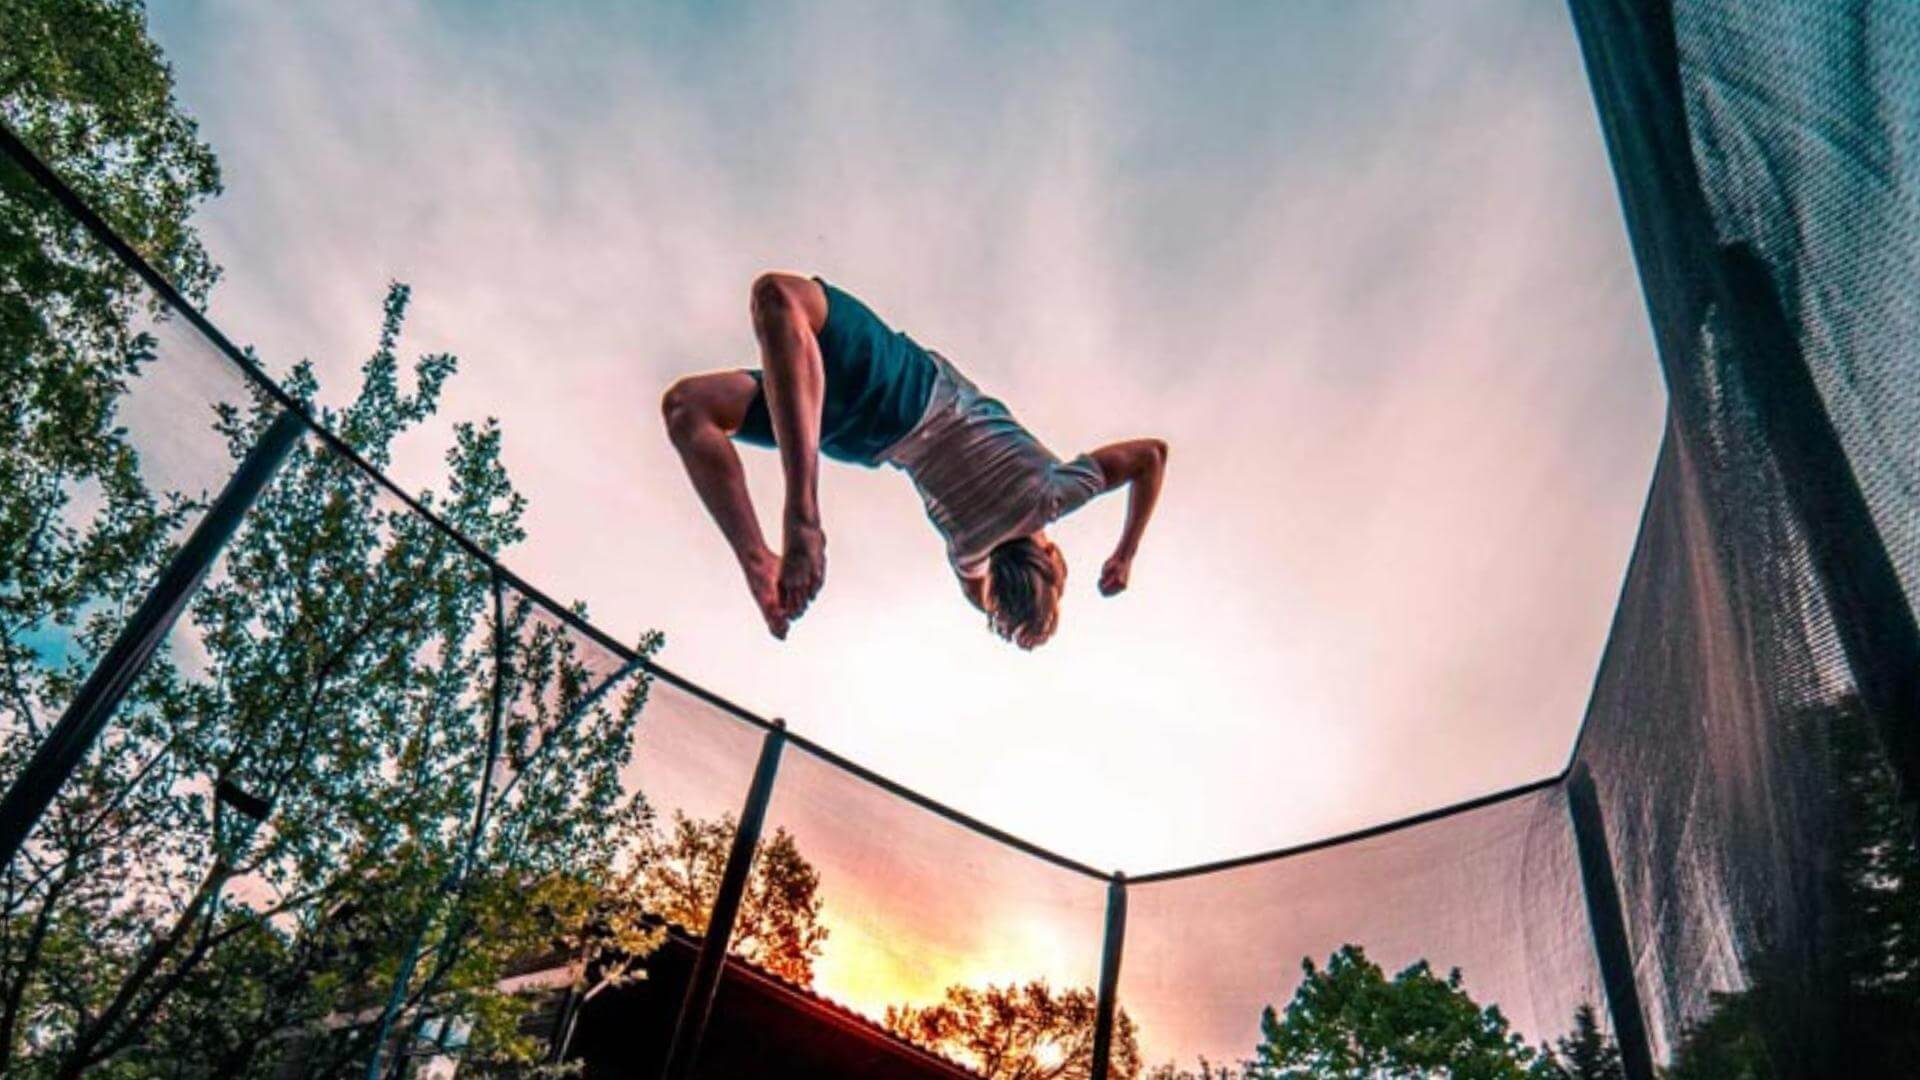 How to do a Backflip Step by Step on a Trampoline